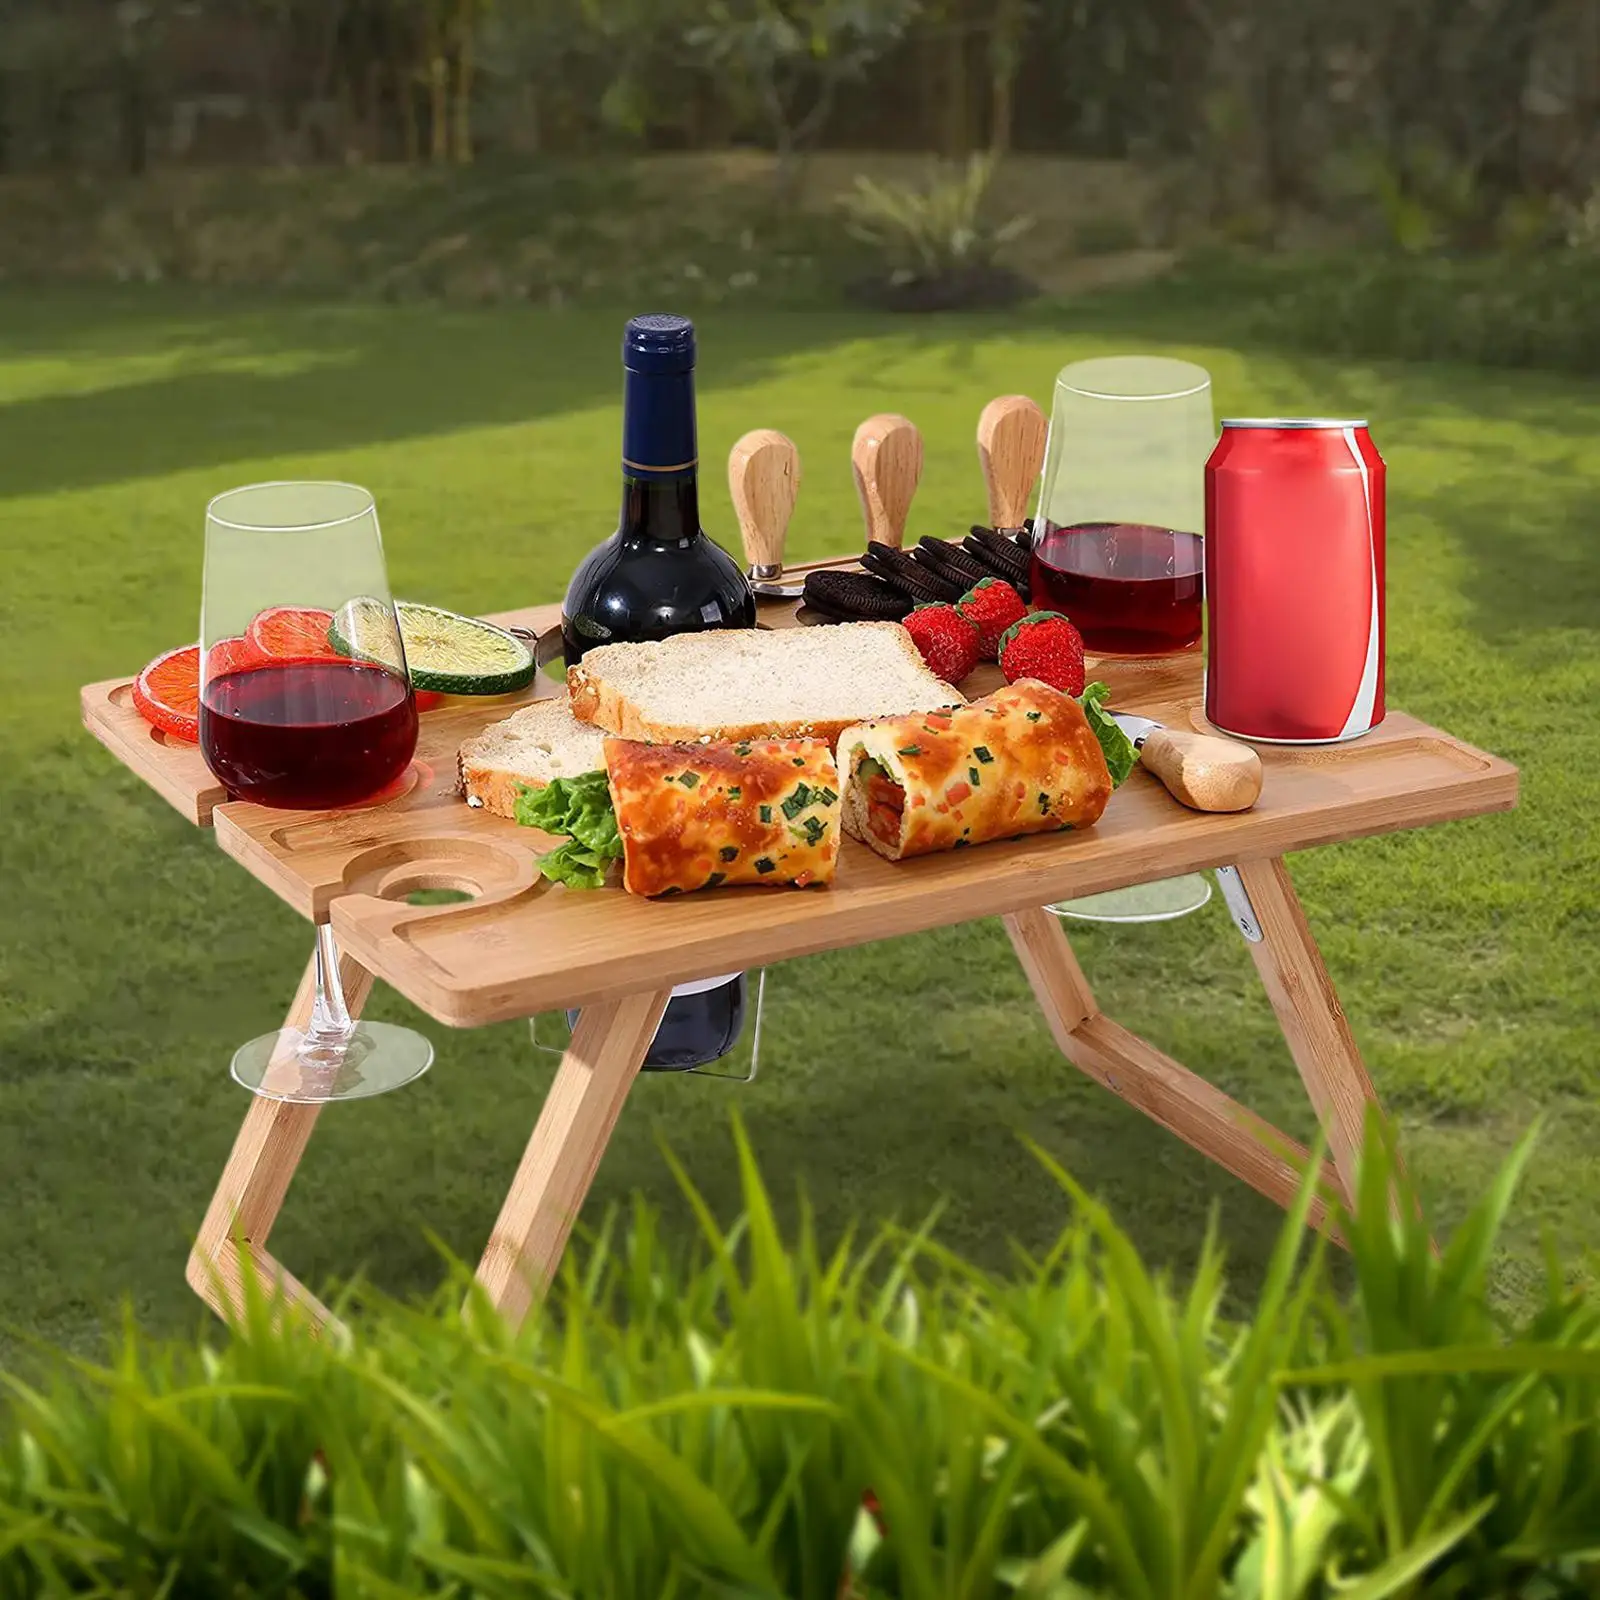 Folding Picnic Table Portable 2-in-1 Wine Table Wine Rack Holder Wine Glass Rack for Garden Party Camping Beach Outdoor Travel